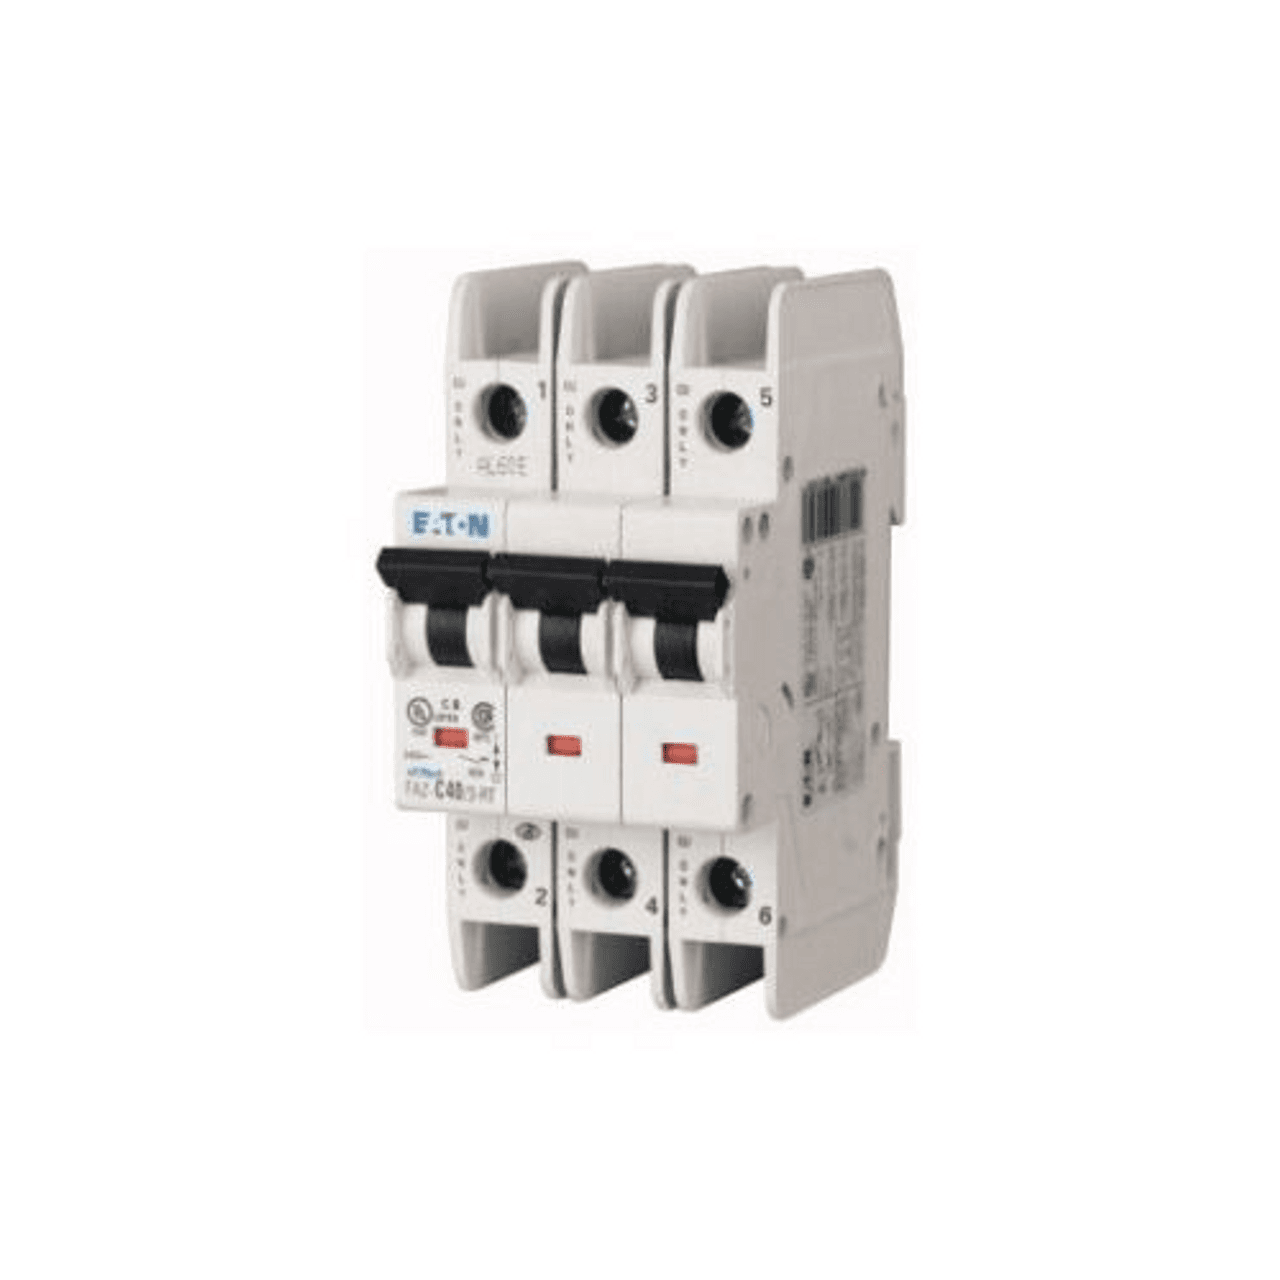 Eaton FAZ-D5/3-RT 277/480 VAC 50/60 Hz, 5 A, 3-Pole, 10/14 kA, 10 to 20 x Rated Current, Ring Tongue Terminal, DIN Rail Mount, Standard Packaging, D-Curve, Current Limiting, Thermal Magnetic